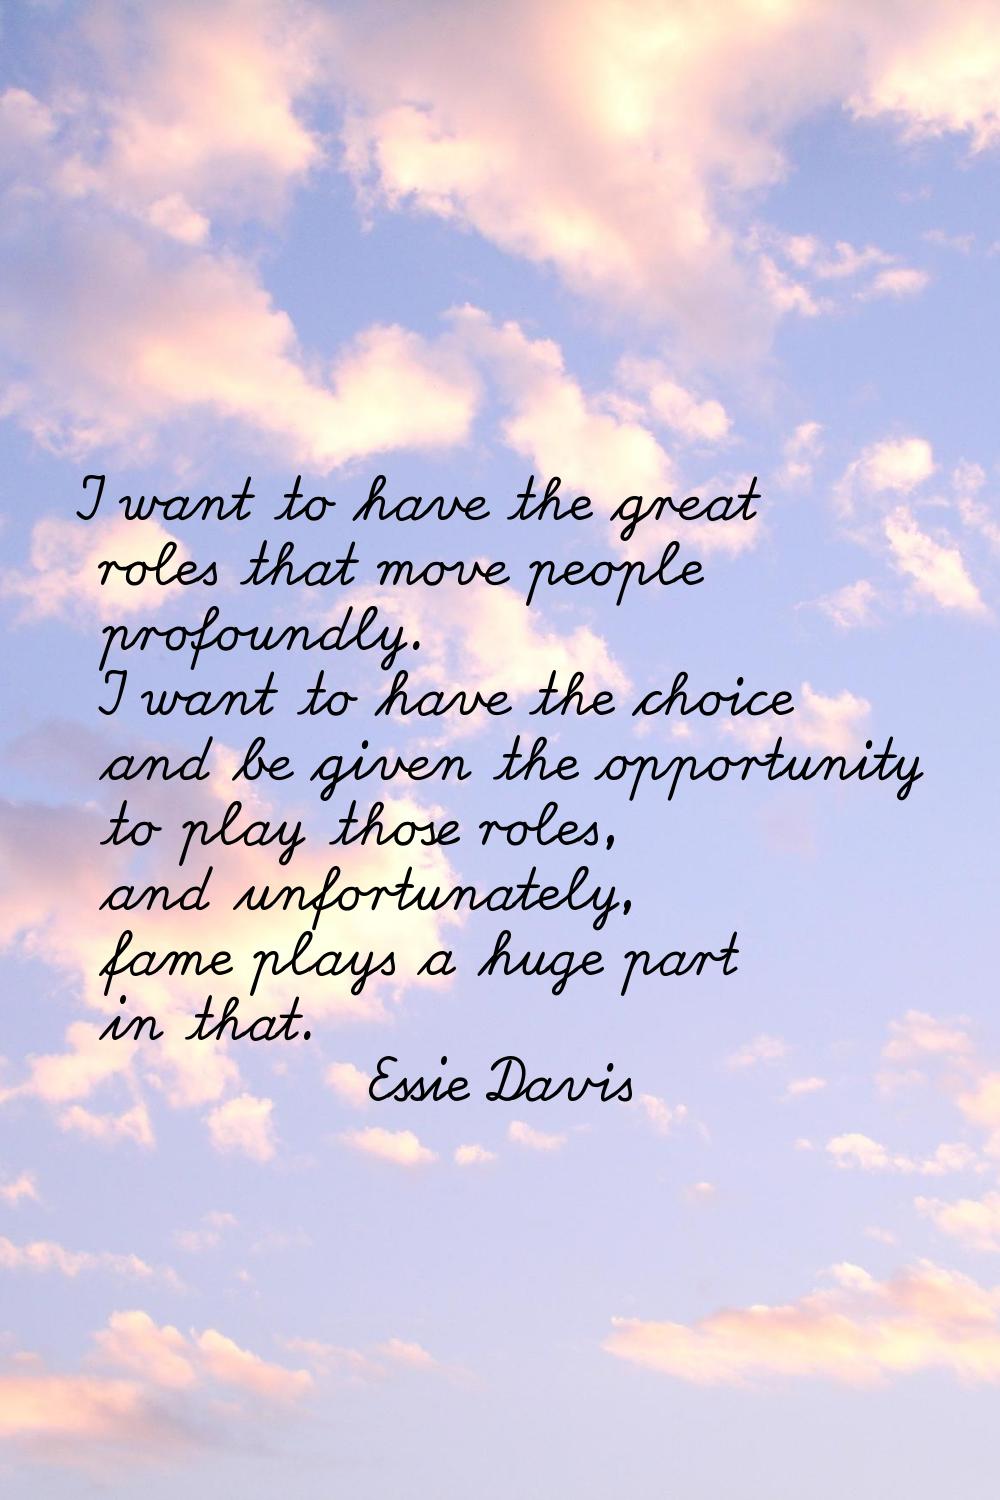 I want to have the great roles that move people profoundly. I want to have the choice and be given 